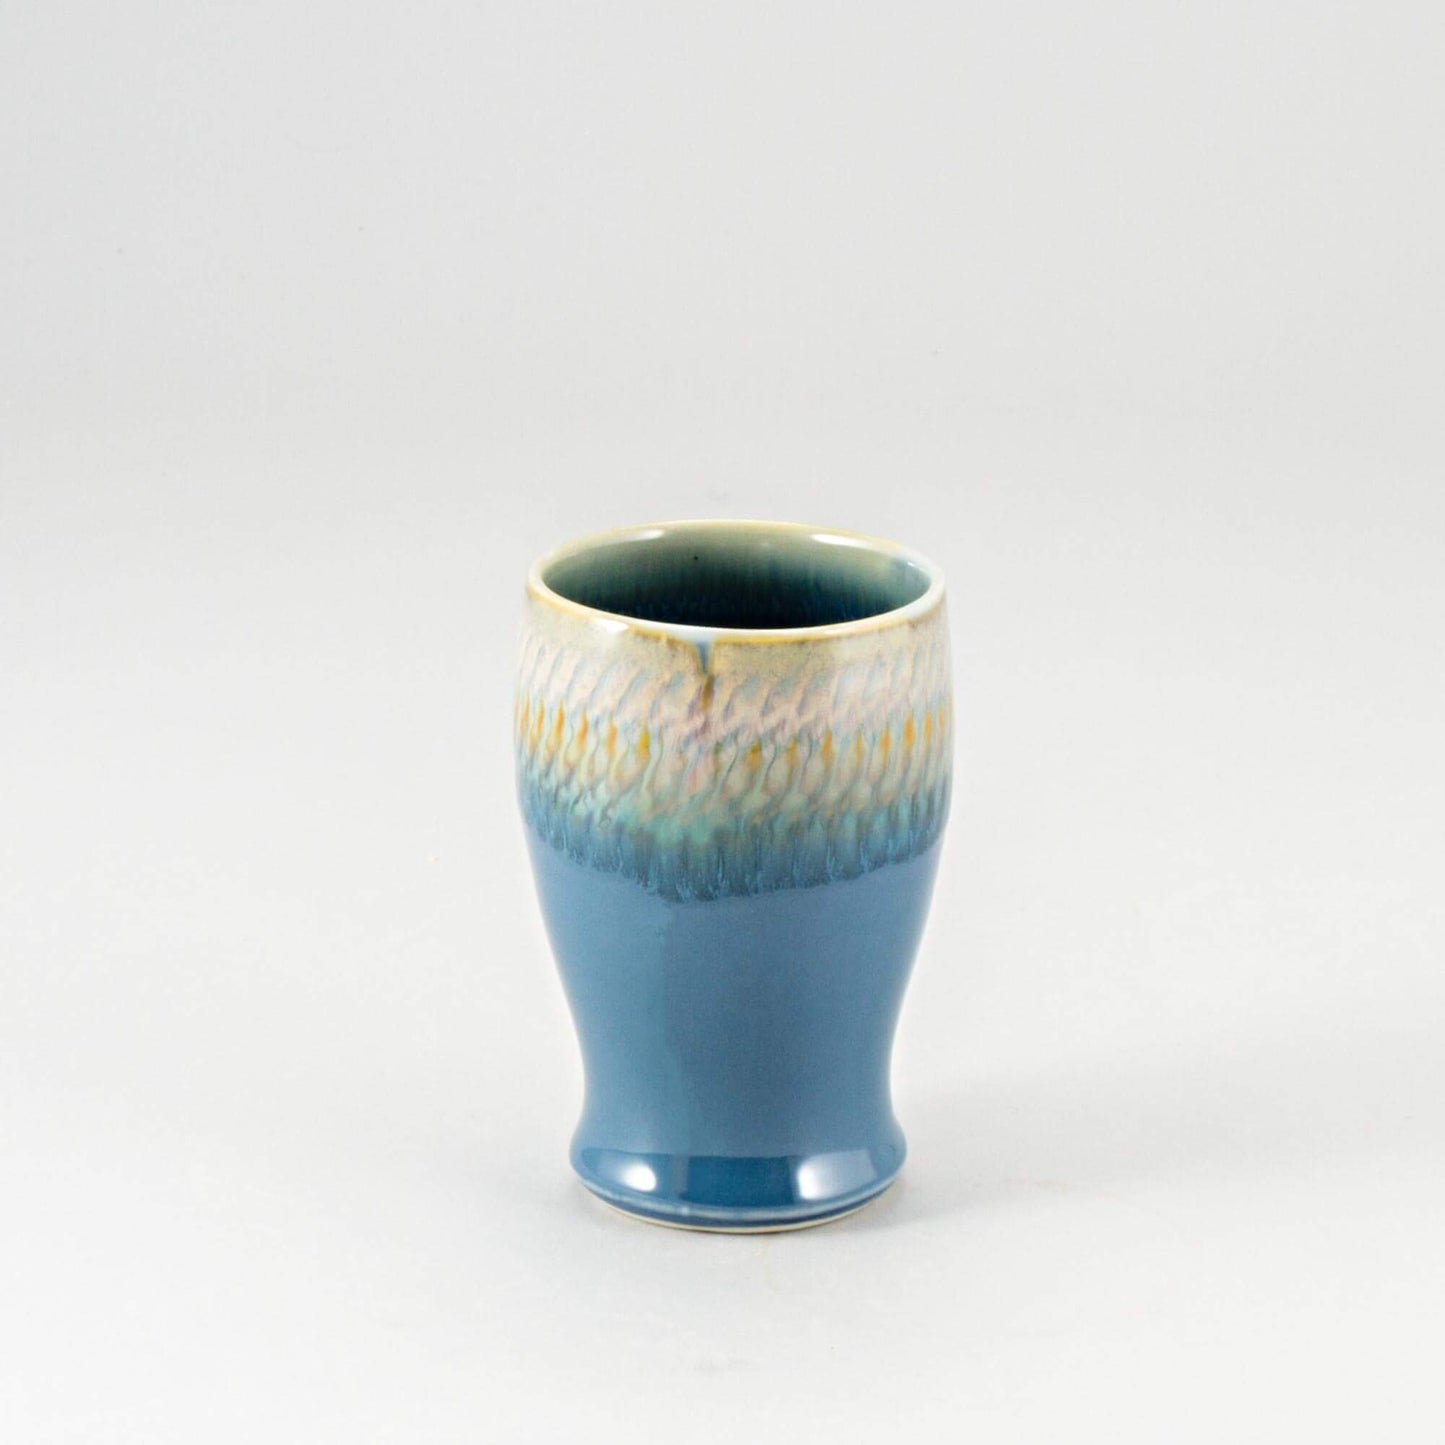 Handmade Pottery Curvy Tumbler in Blue Oribe pattern made by Georgetown Pottery in Maine